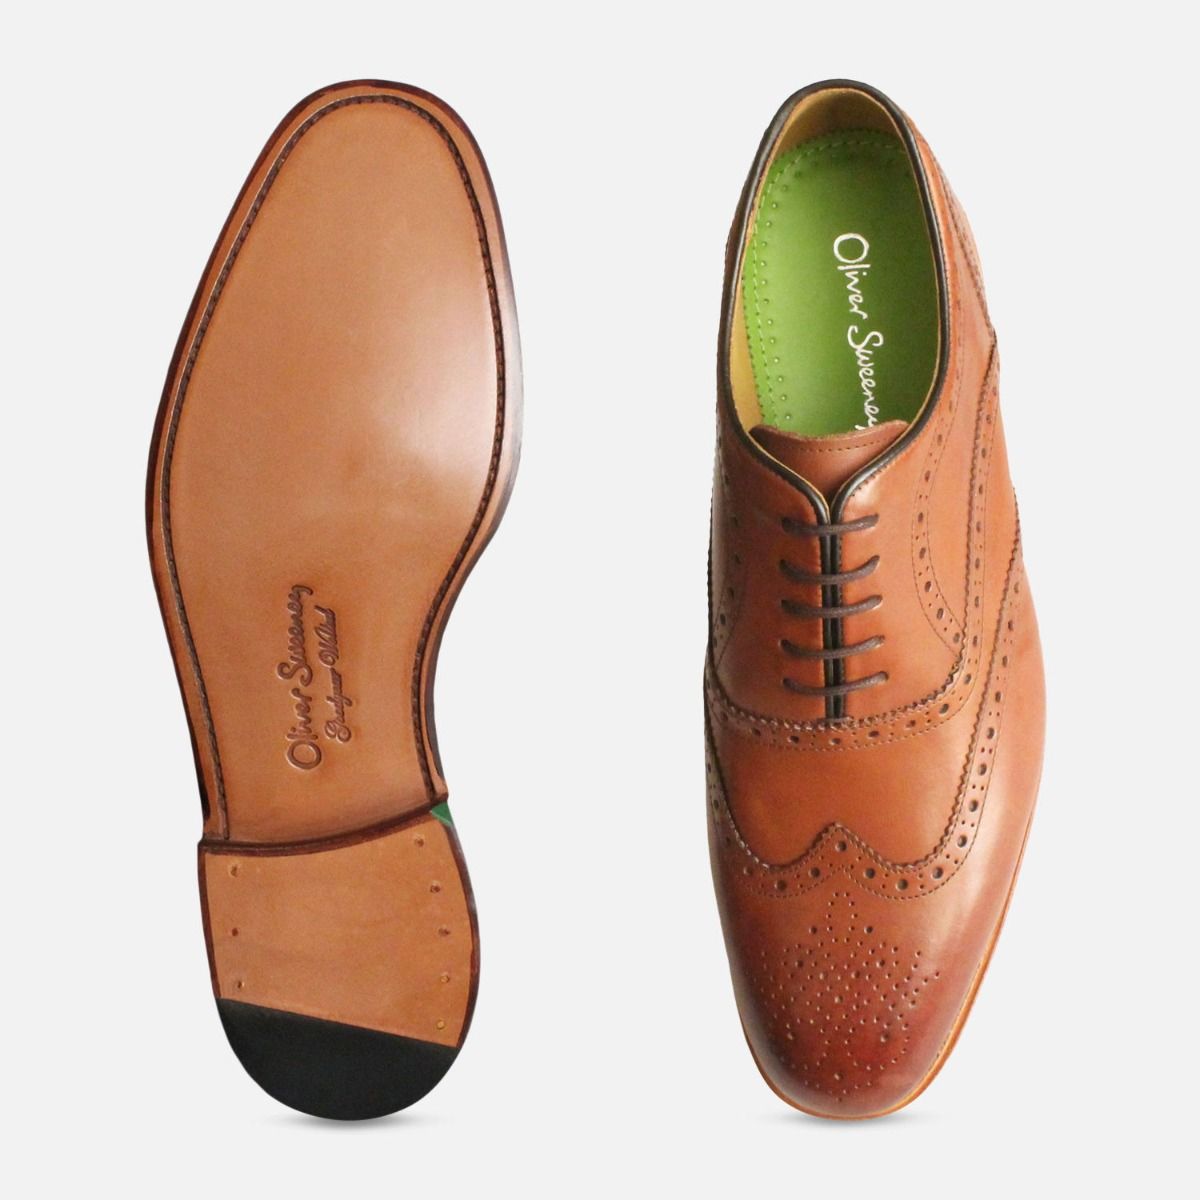 Oliver Sweeney Shoes Dark Tan Oxford 